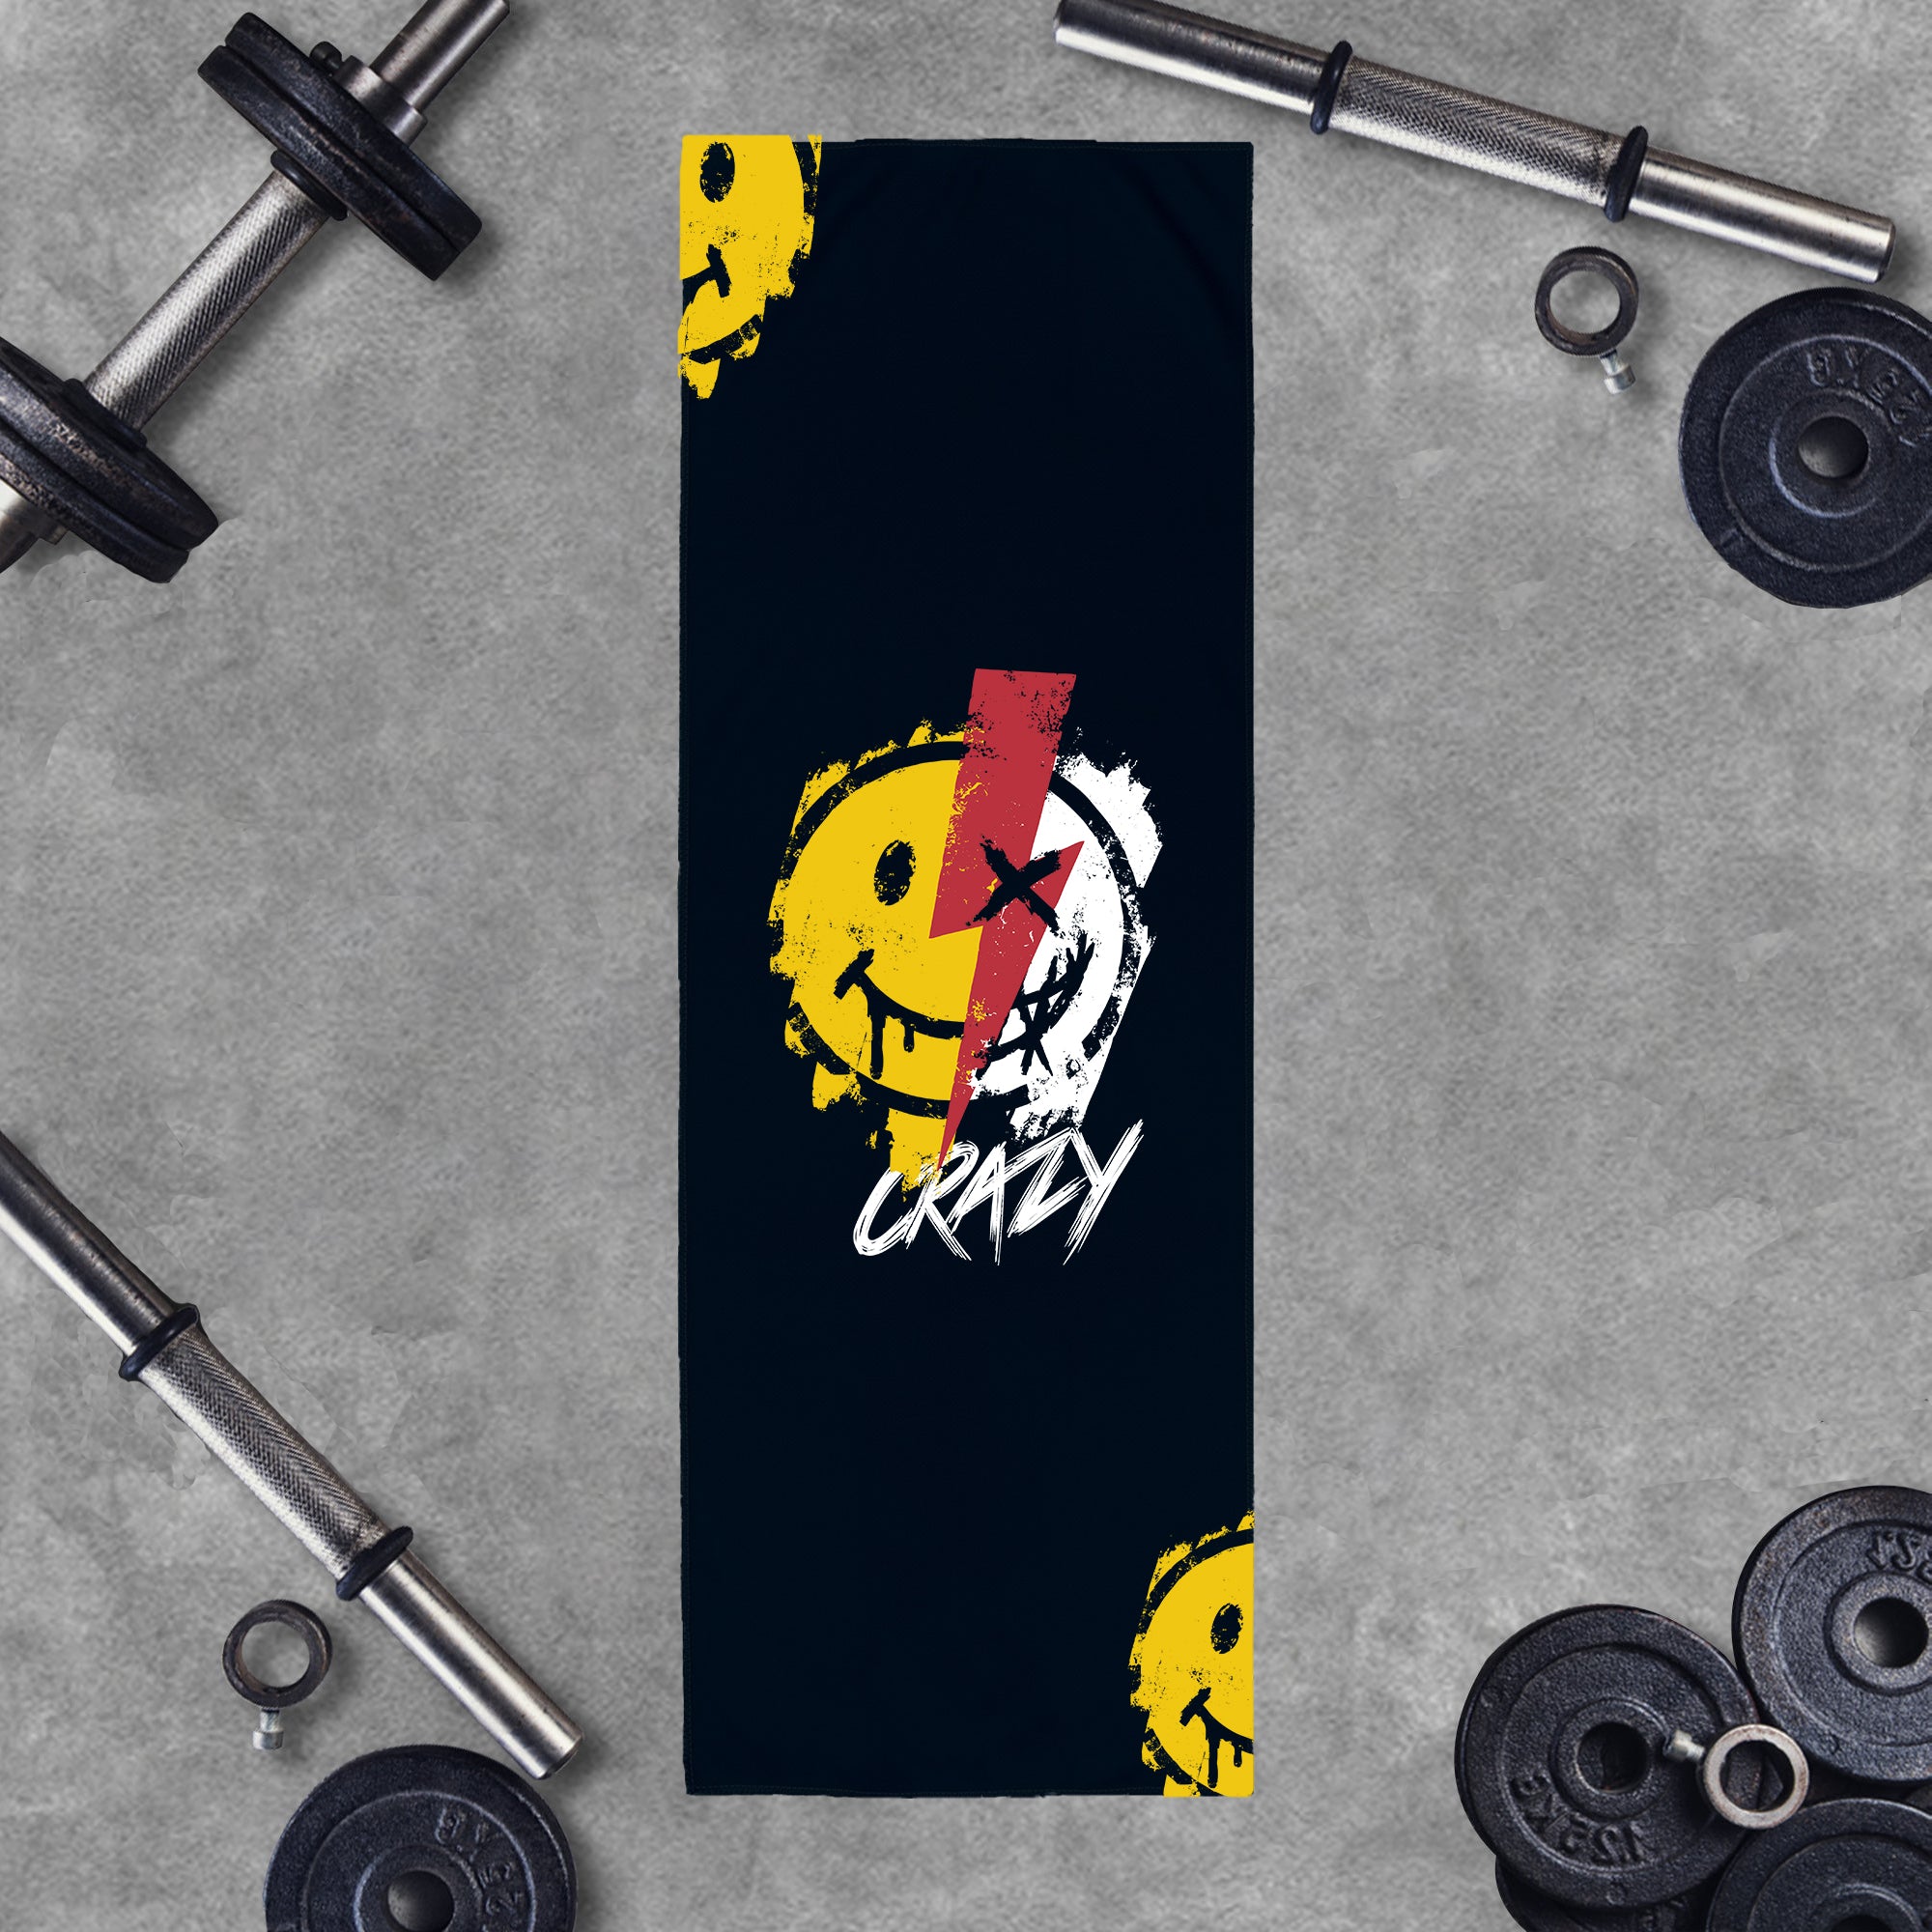 Crazy Smiley Graphic Workout Cooling Towel